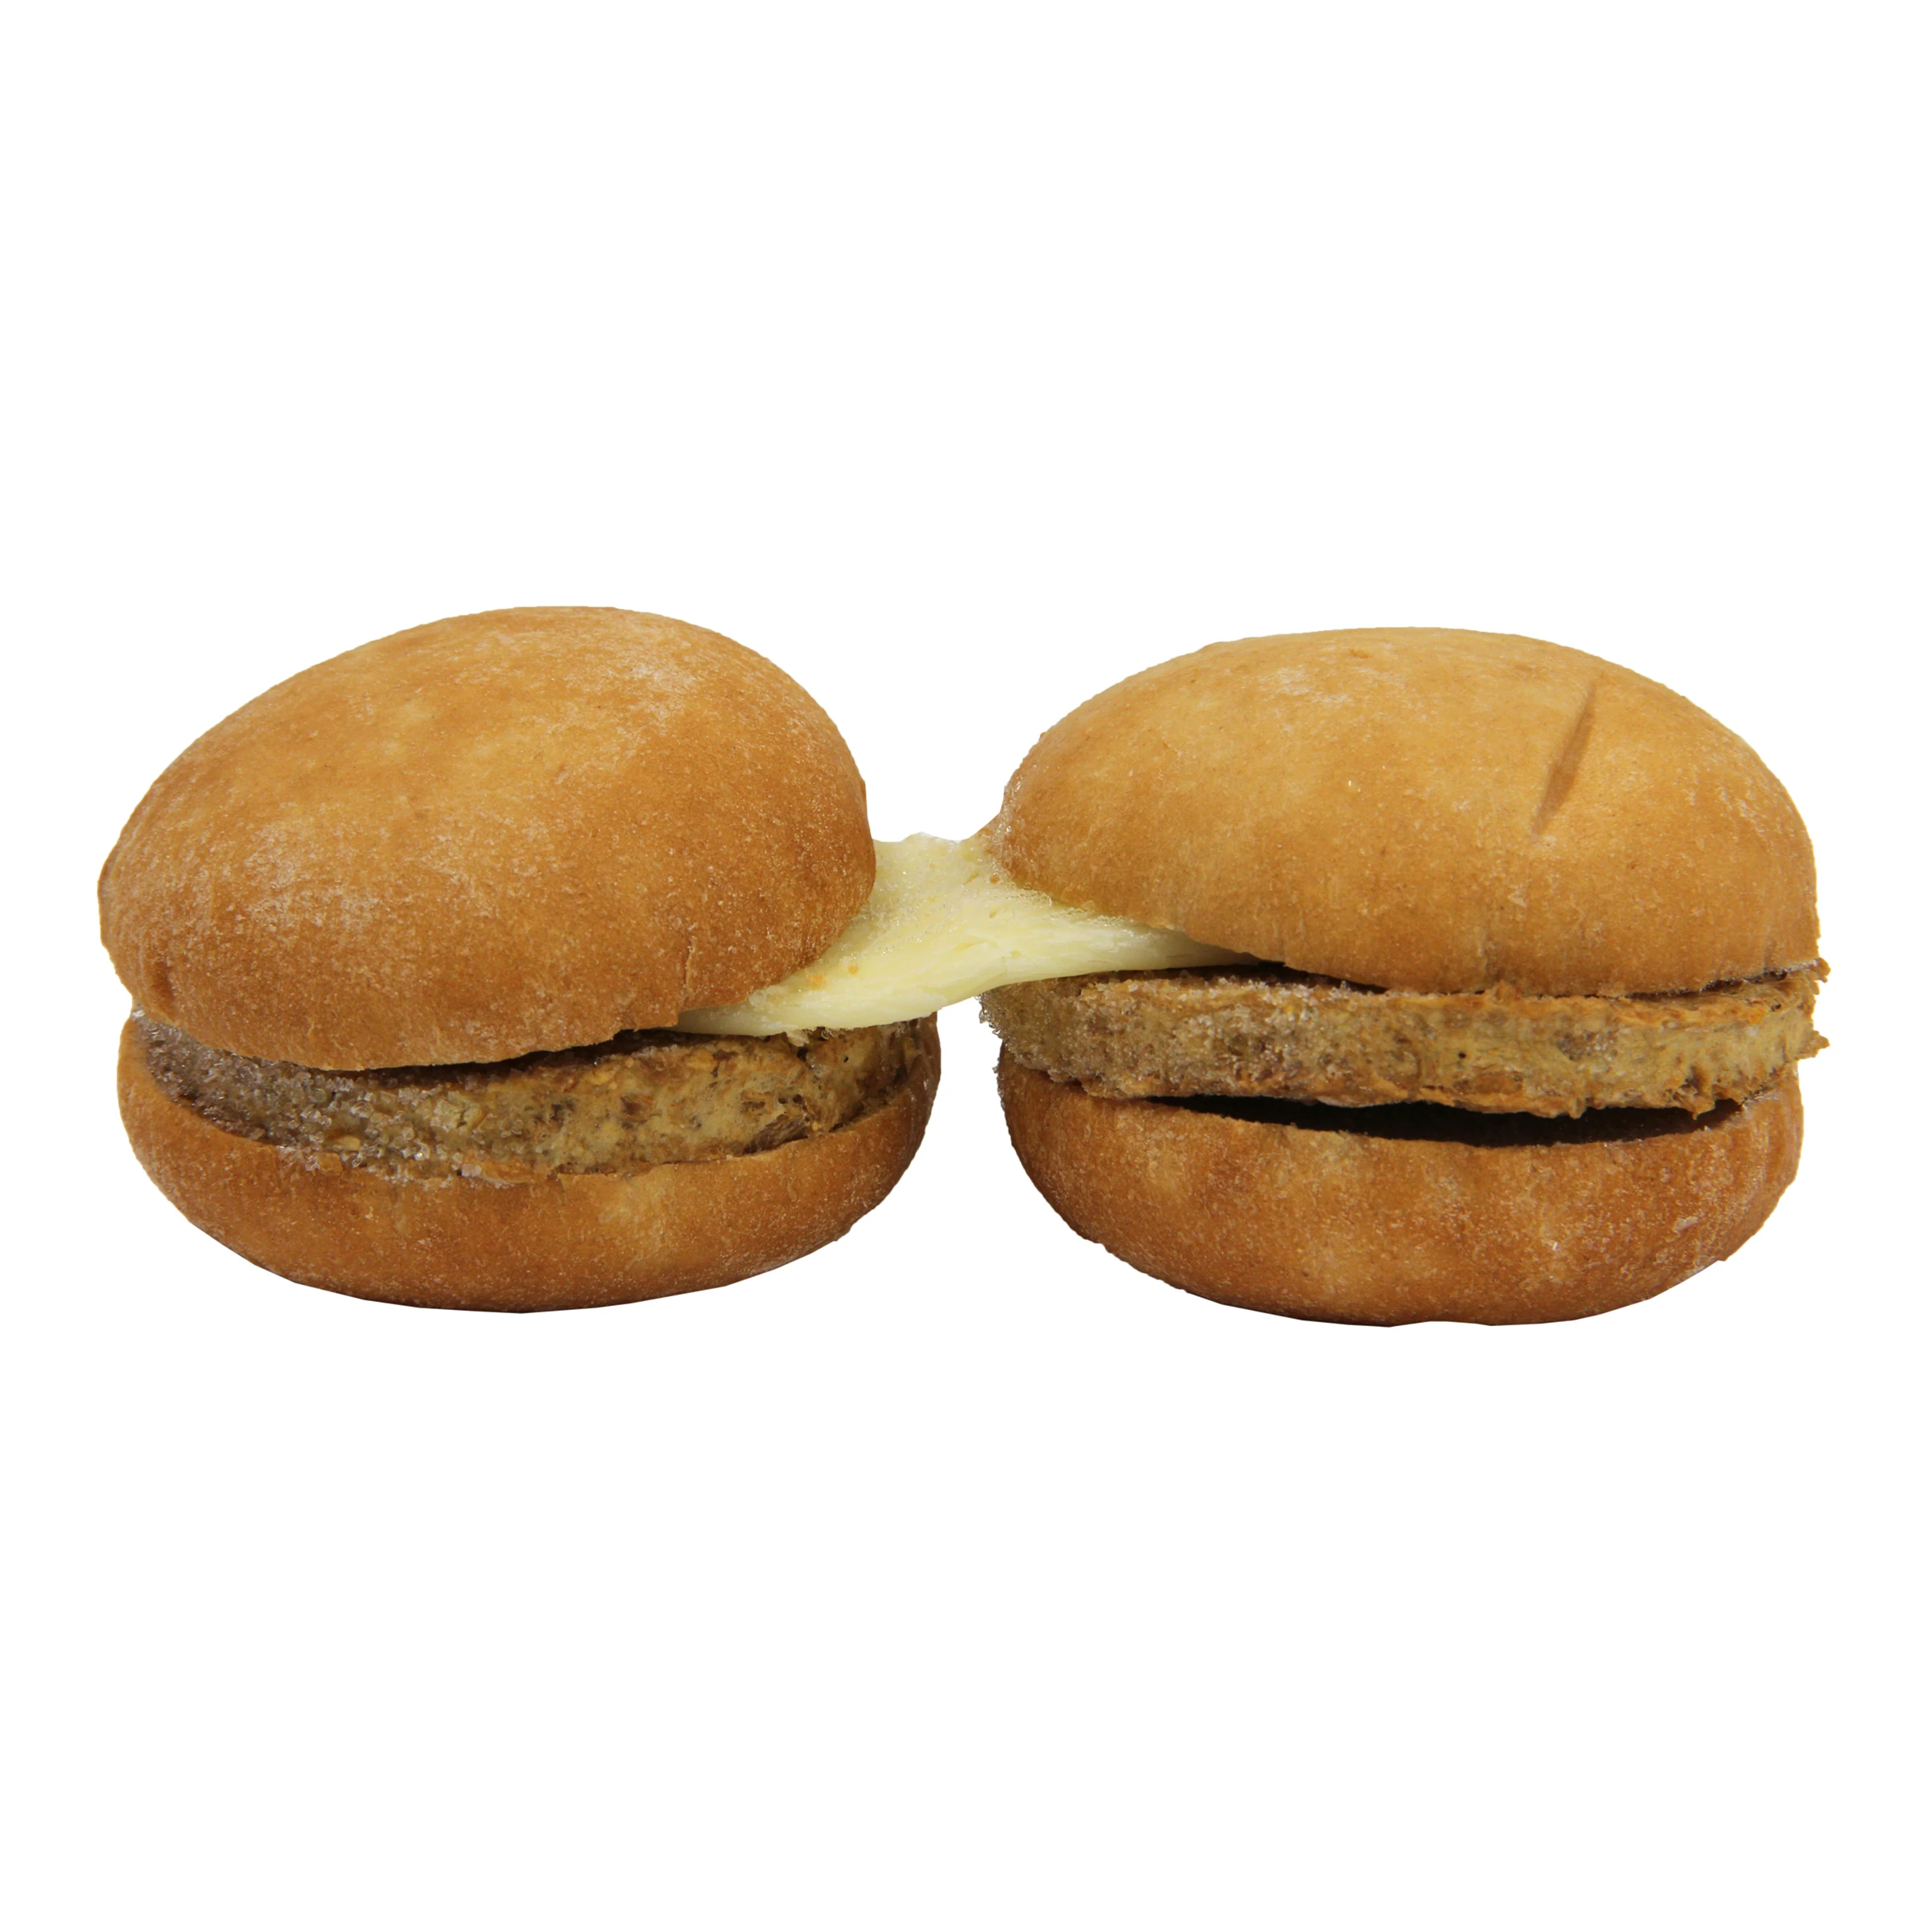 AdvancePierre™ Fully Cooked Mini Twin Veggie Patties with American White Cheese on a Whole Grain Bun, 4.61ozhttp://images.salsify.com/image/upload/s--goAVZudF--/qeqcs1uczcy61jzzek34.webp